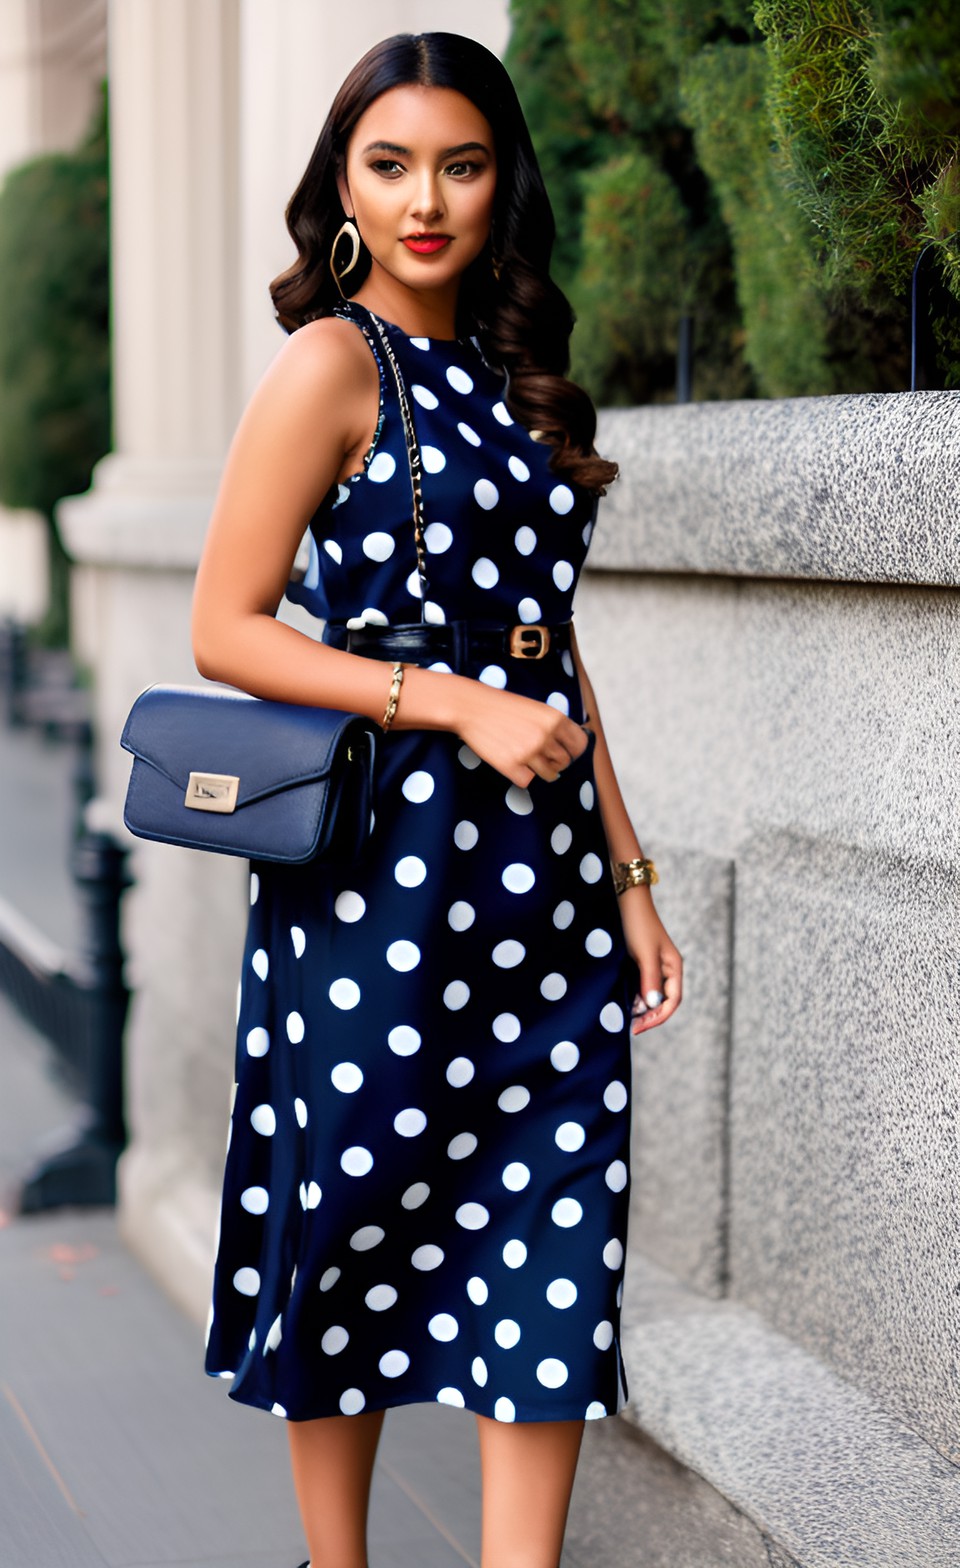 ai generated image of woman wearing navy blue and white polka dot dress carrying navy blue shoulder bag